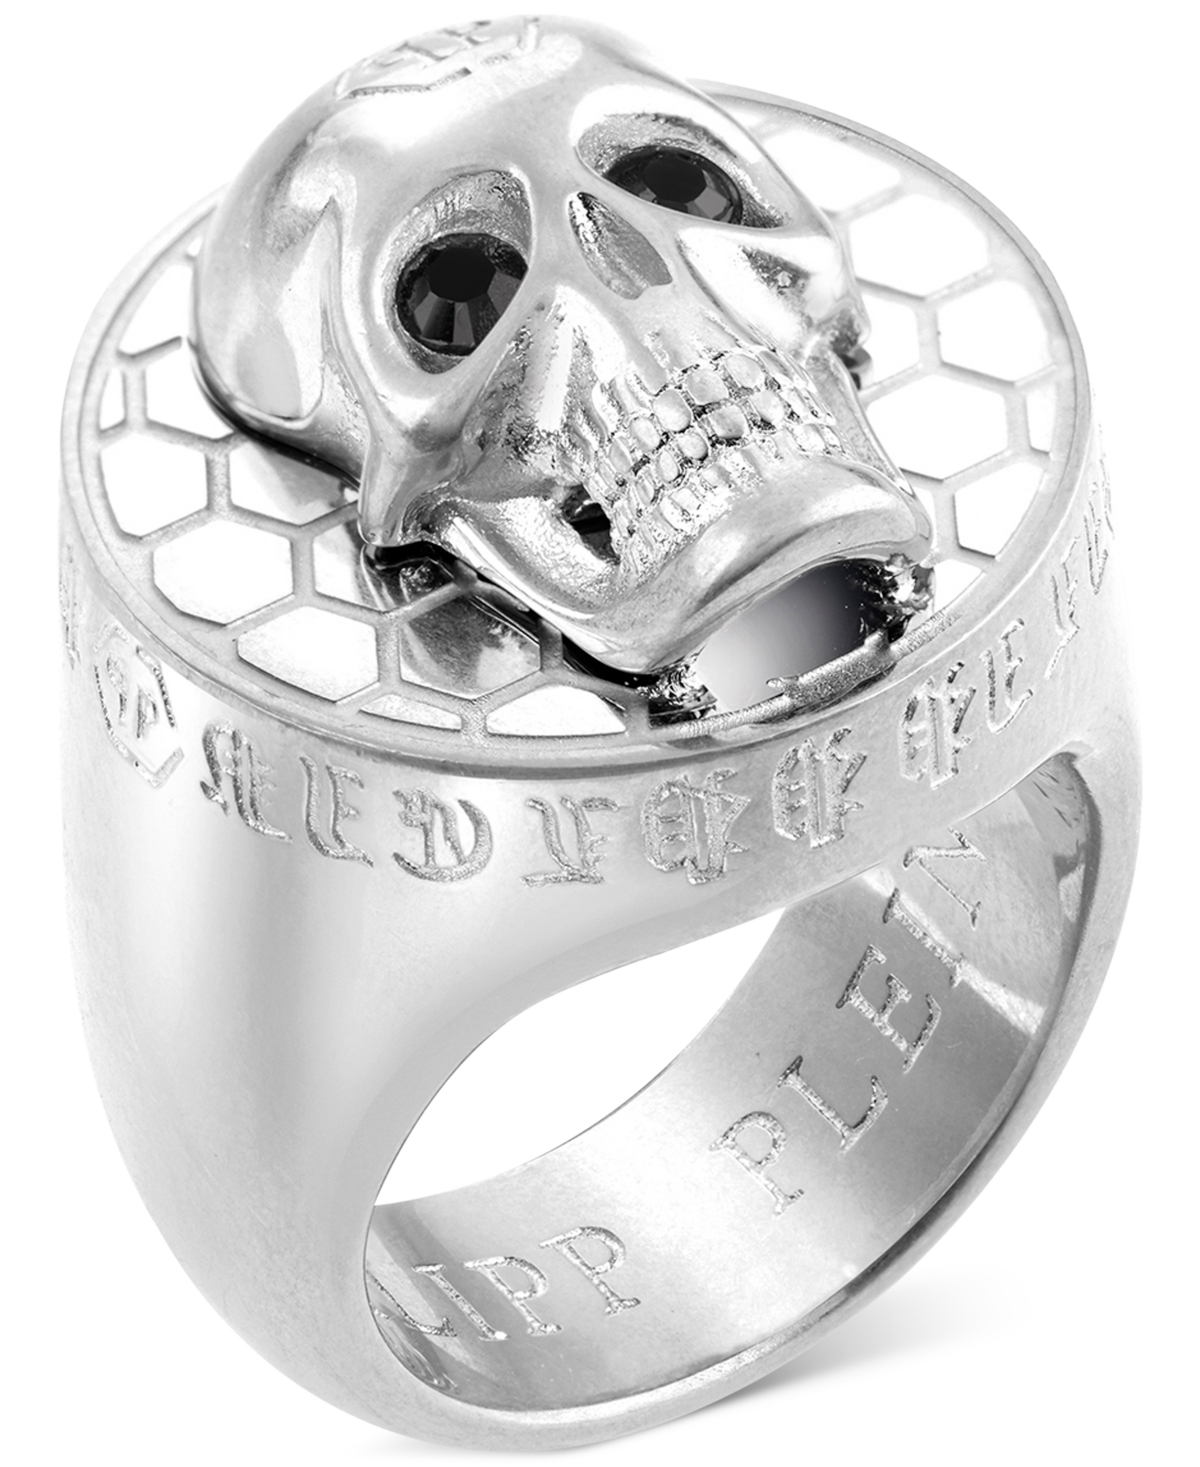 Stainless Steel 3D $kull Statement Ring - Stainless Steel